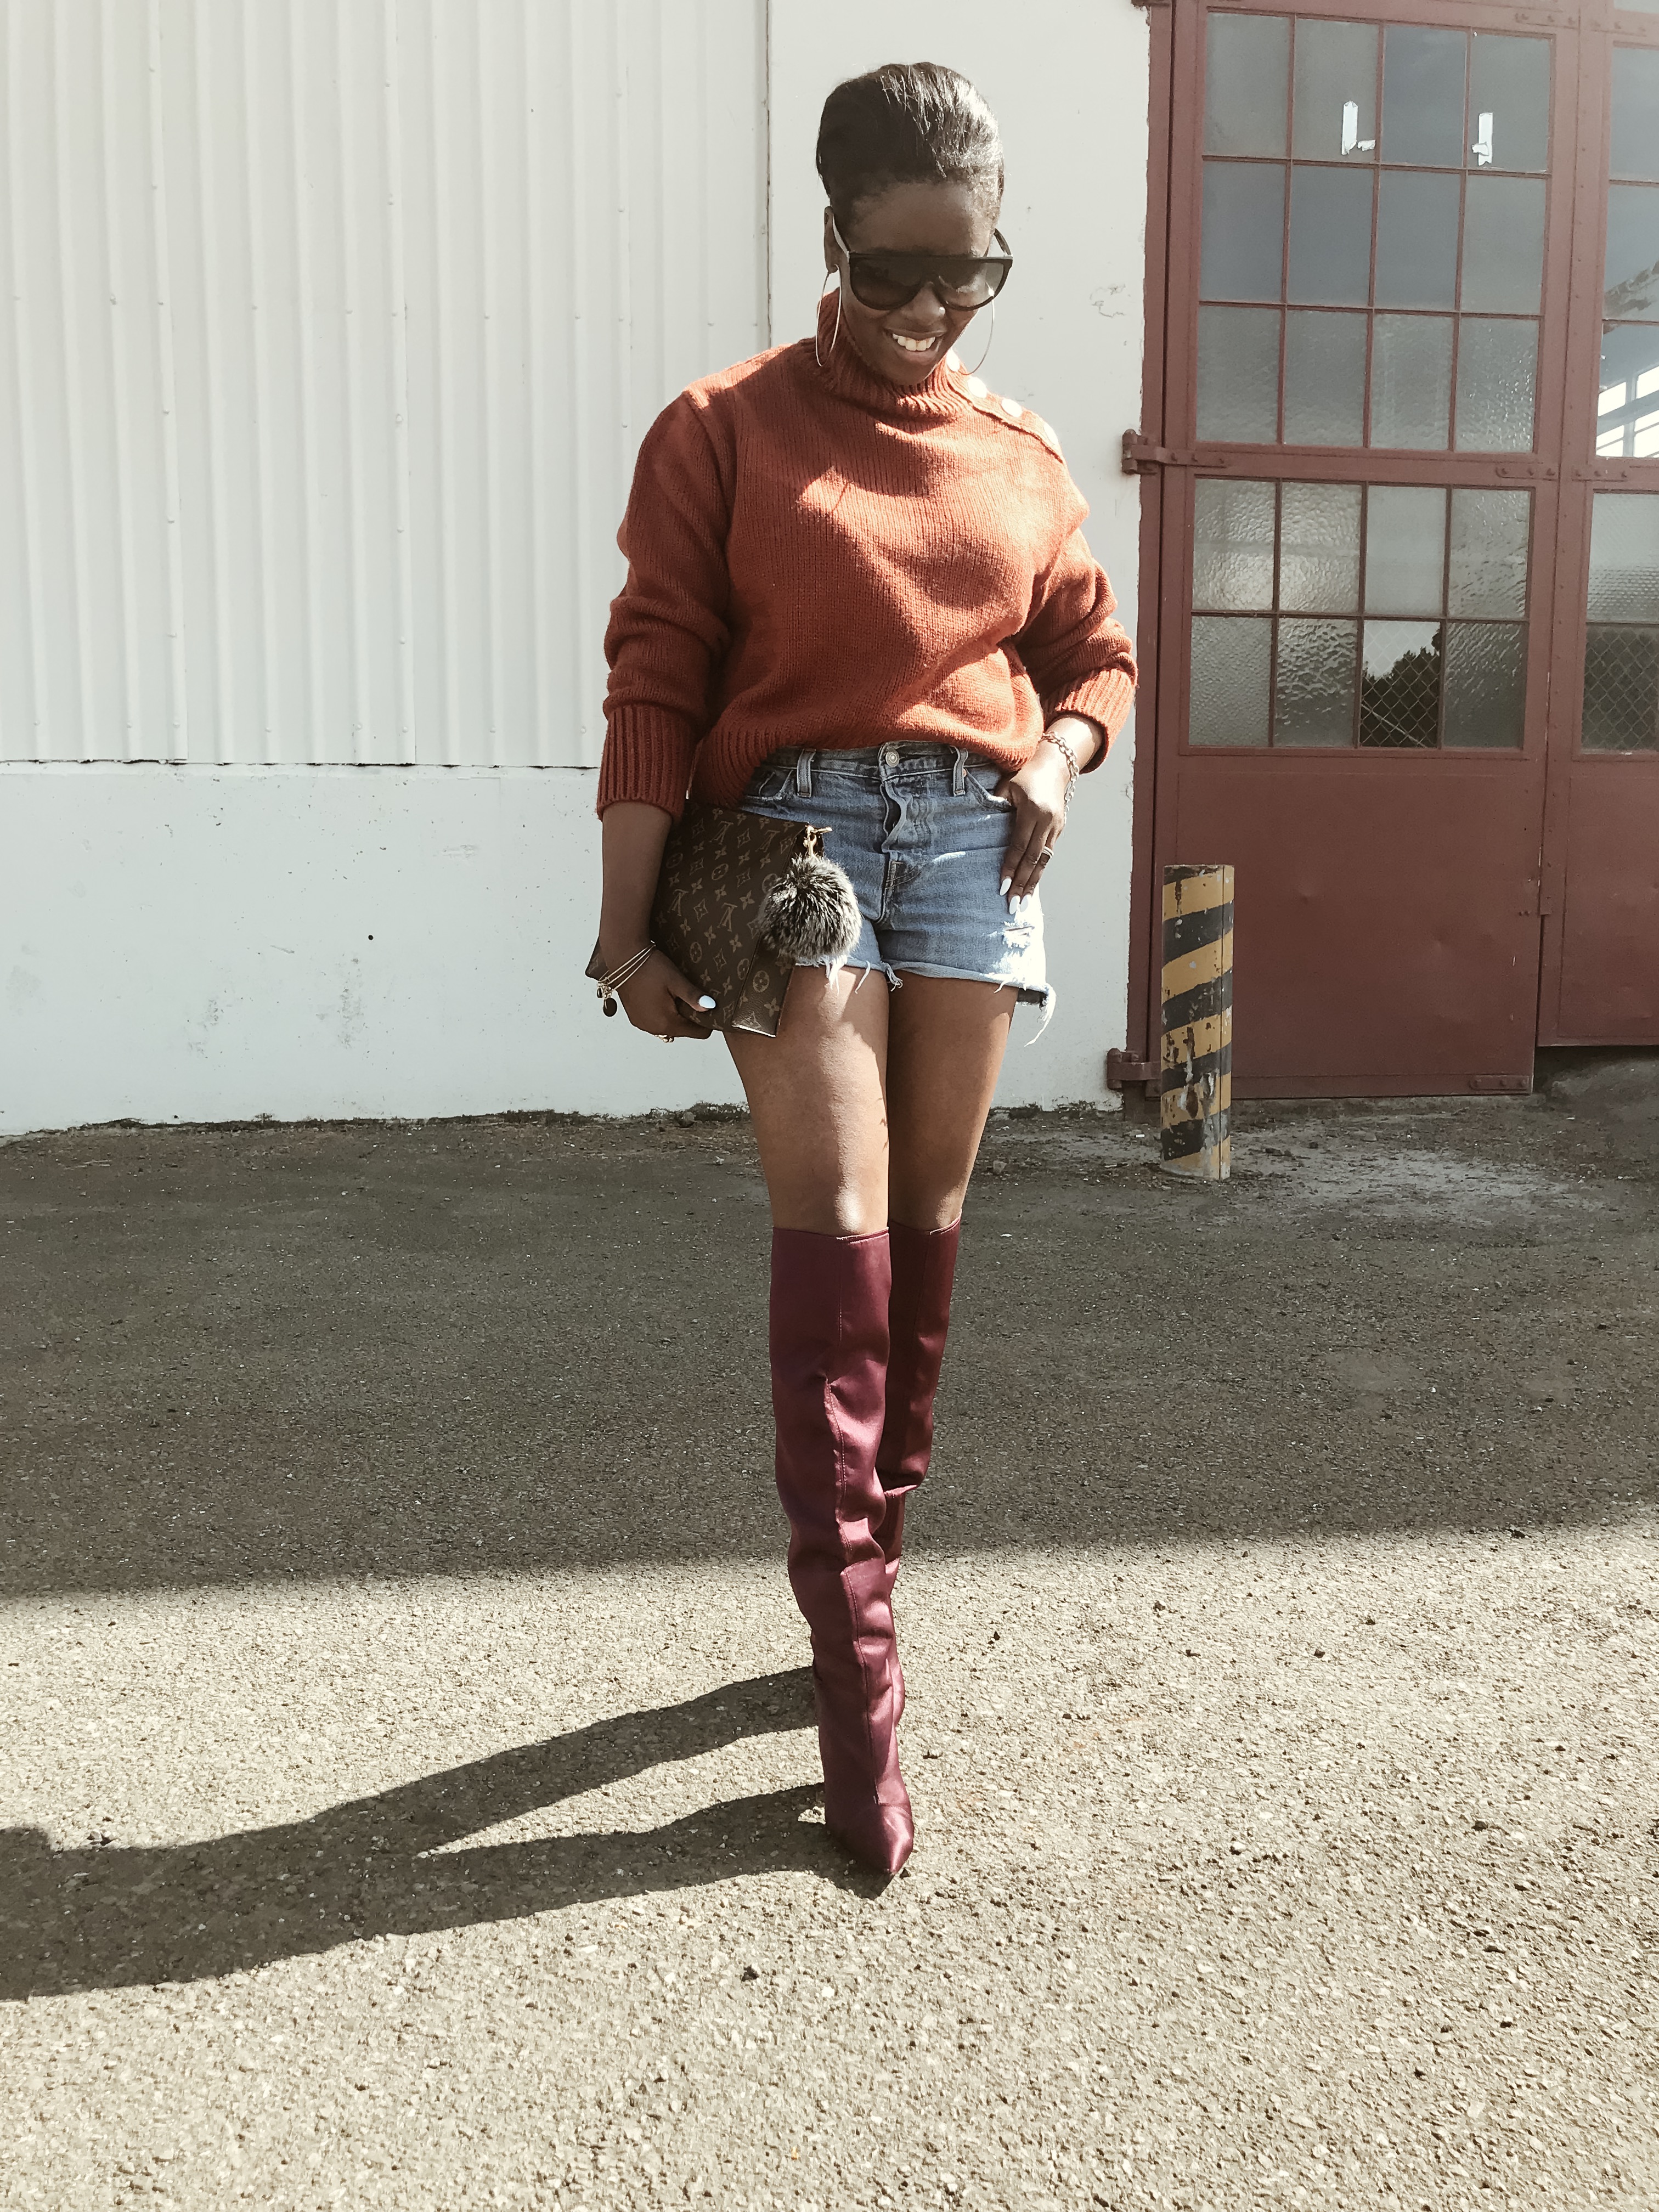 Zara Pumpkin Oversized Sweater Levis Wedgie Fit Cutoff Shorts Zara Burgundy Satin Over The Knee Otk Boots Louis Vuitton Toiletry Pouch 26 Monogram Canvas Celine Shadow Sunglasses Cocoa Butter Diaries Sf San Francisco Bay Area Fashion Style Blog Blogger